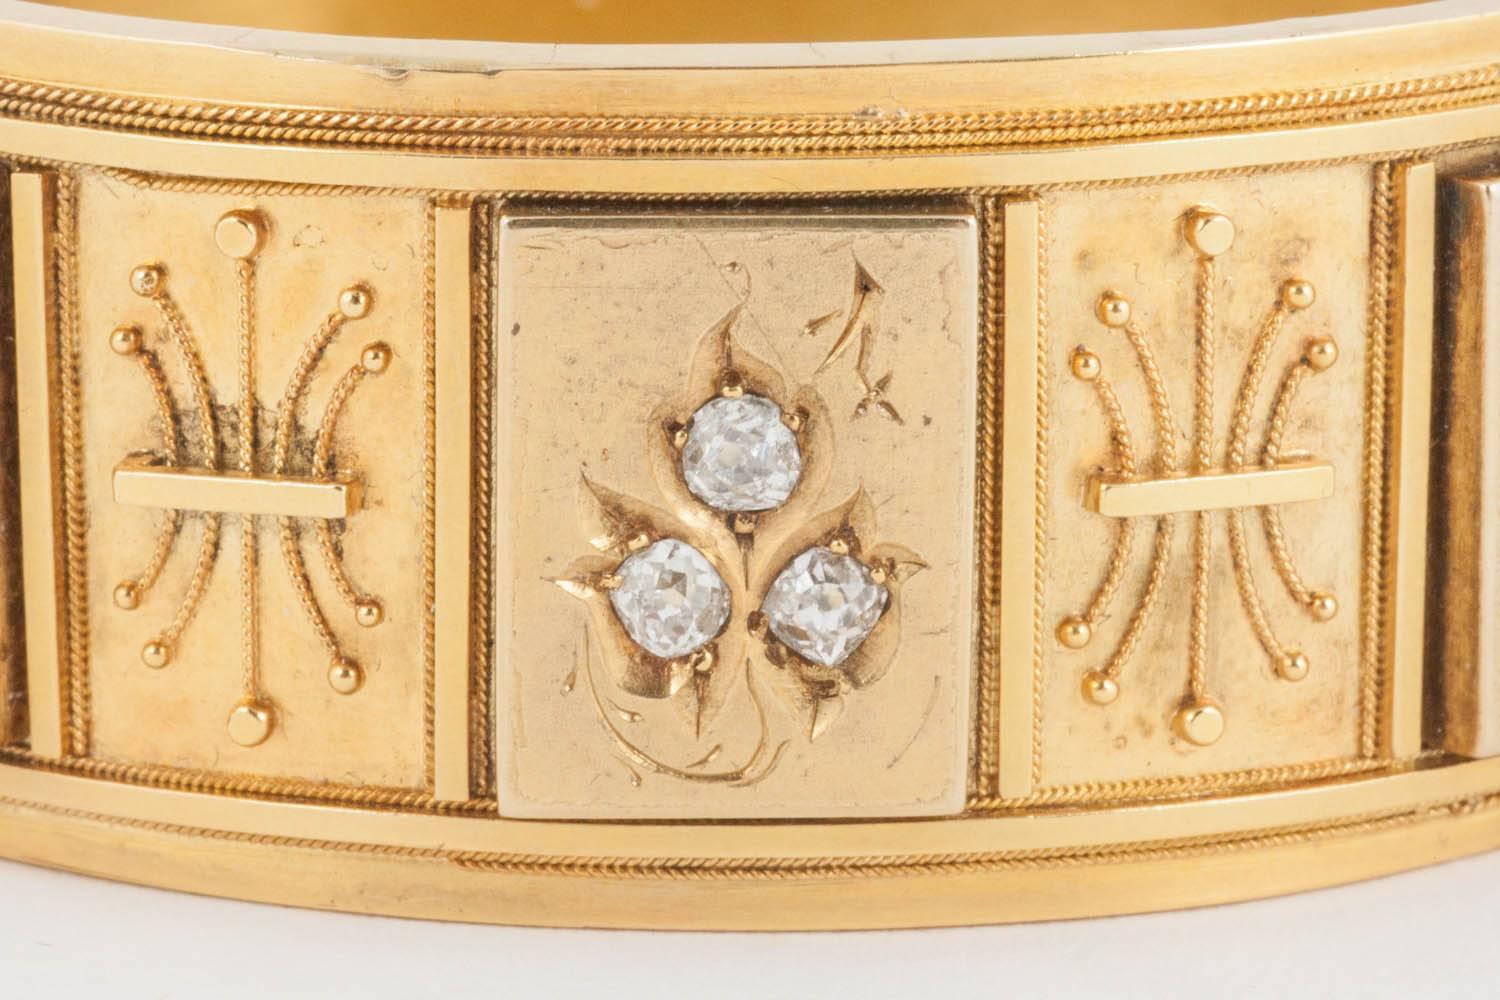 Victorian 15ct Gold wide cuff bangle set with natural Pearls and old cut Diamonds. Etruscan revival details.